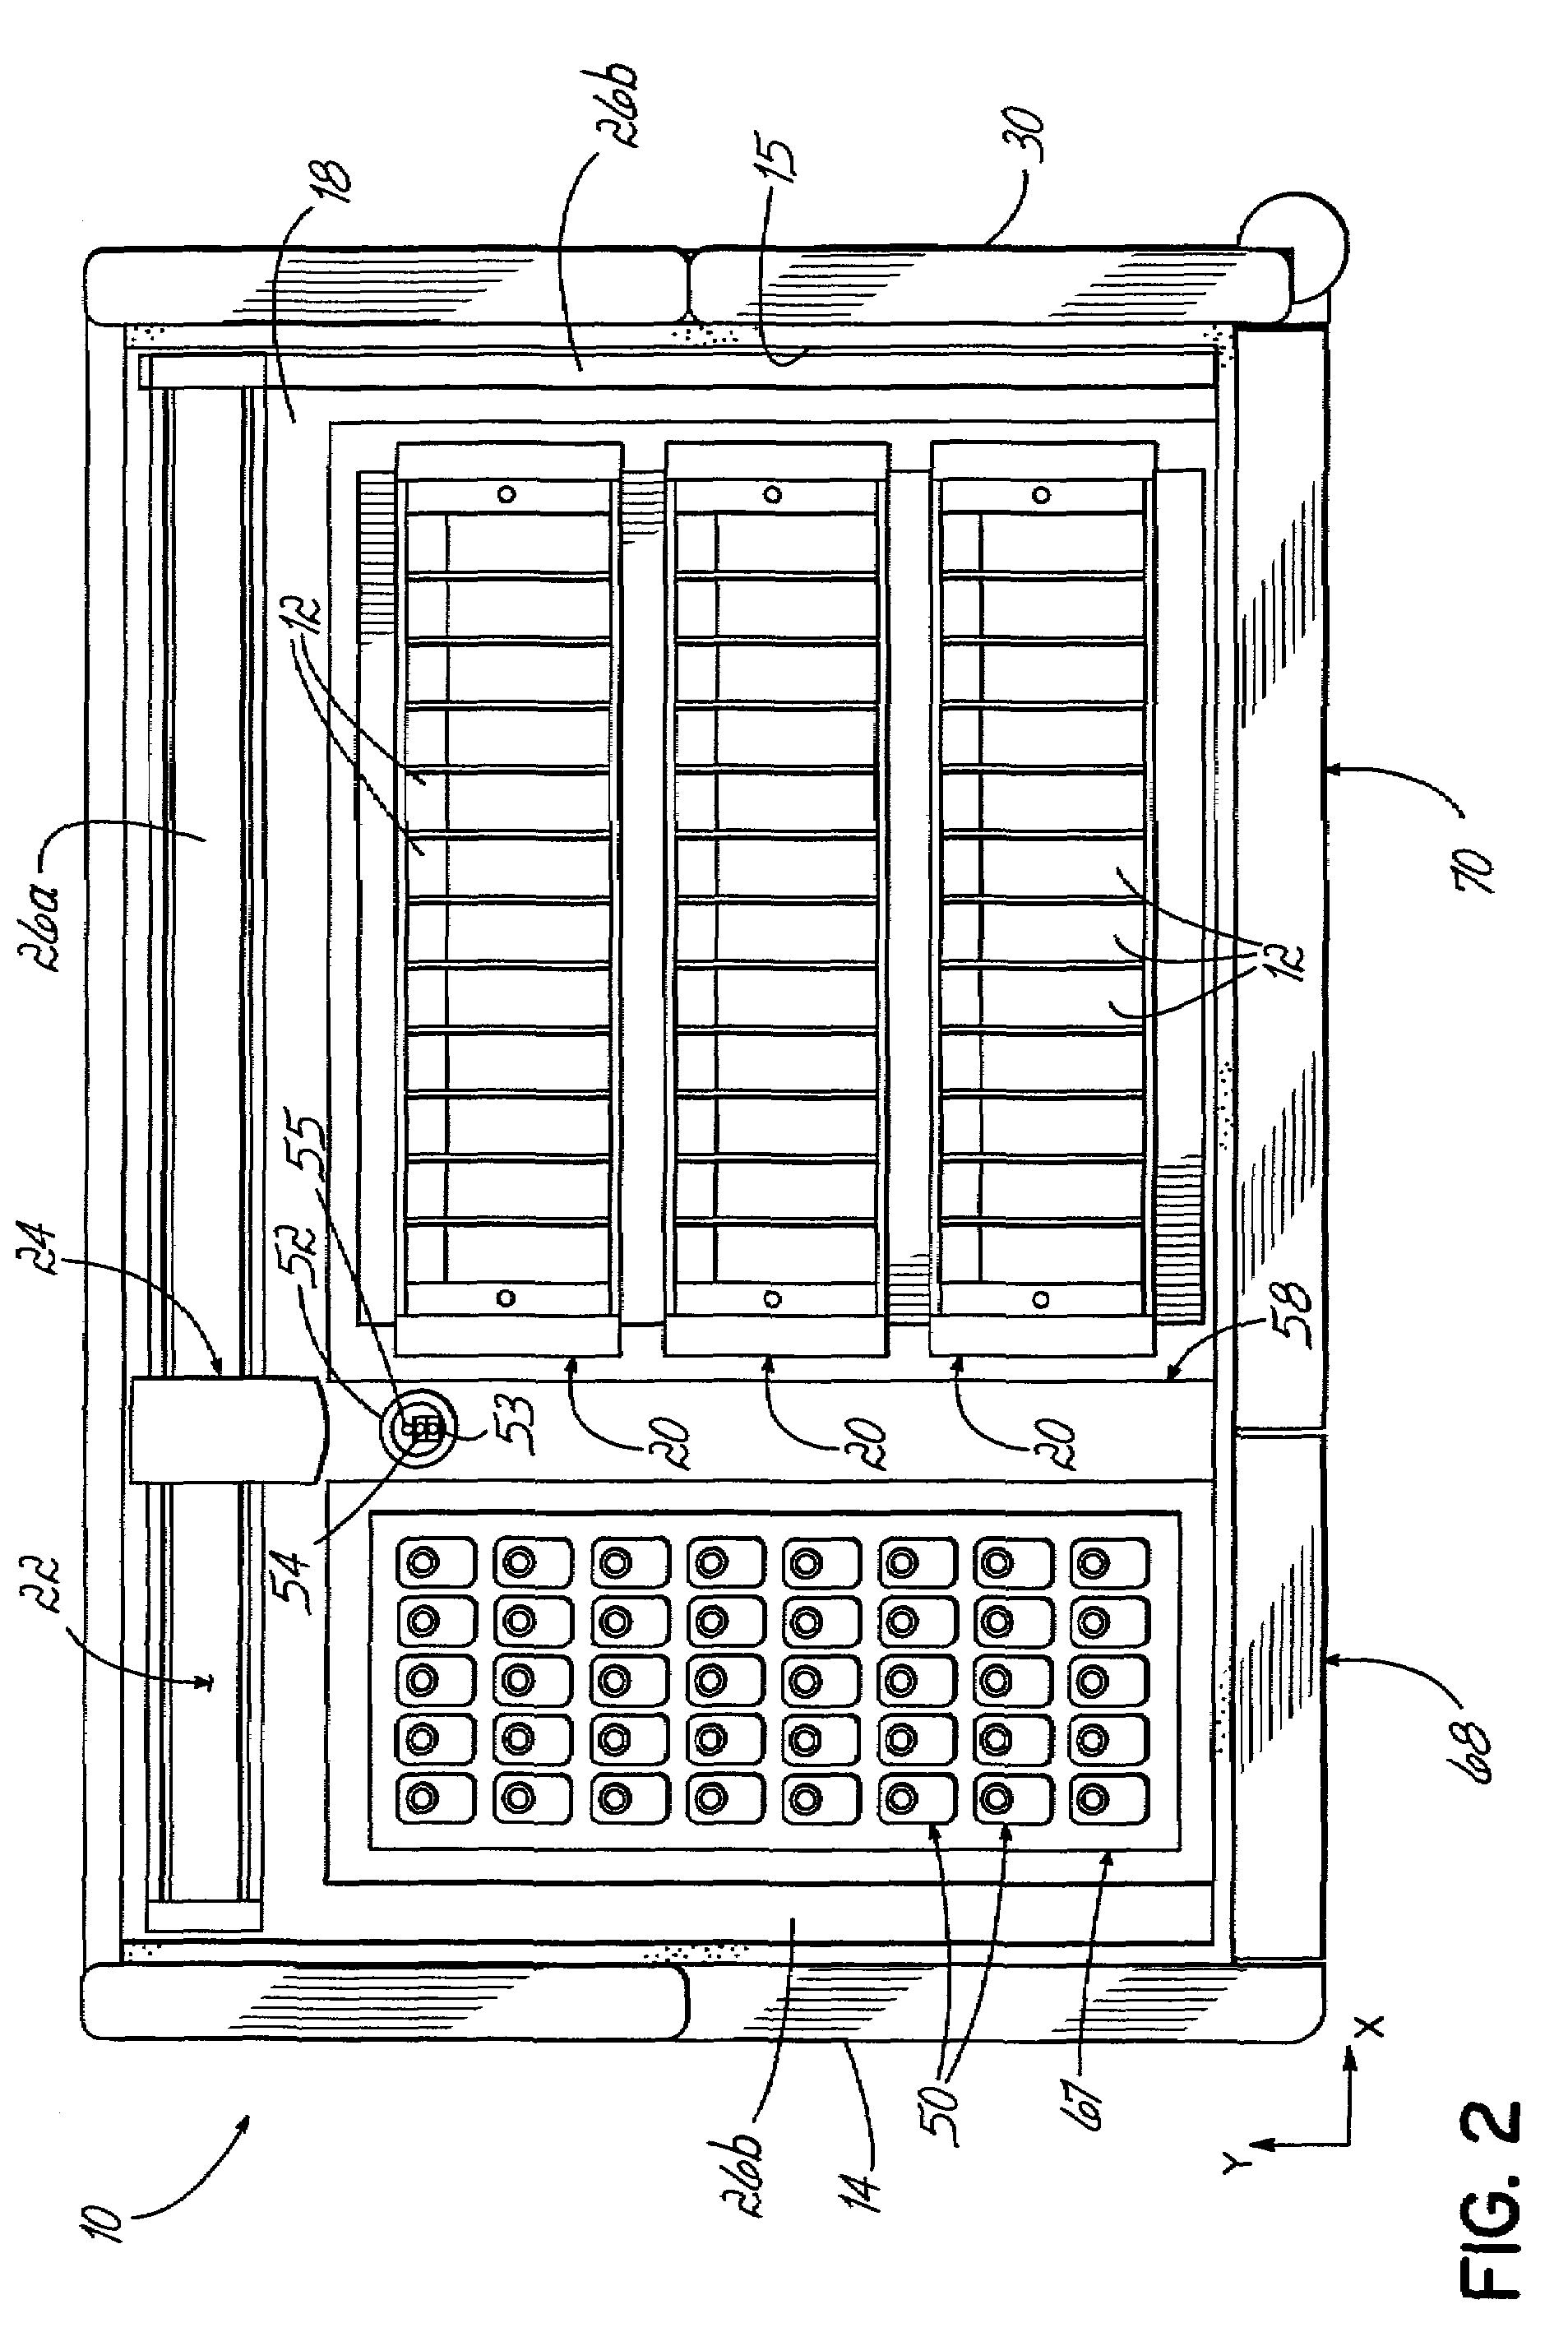 Automated tissue staining system and reagent container